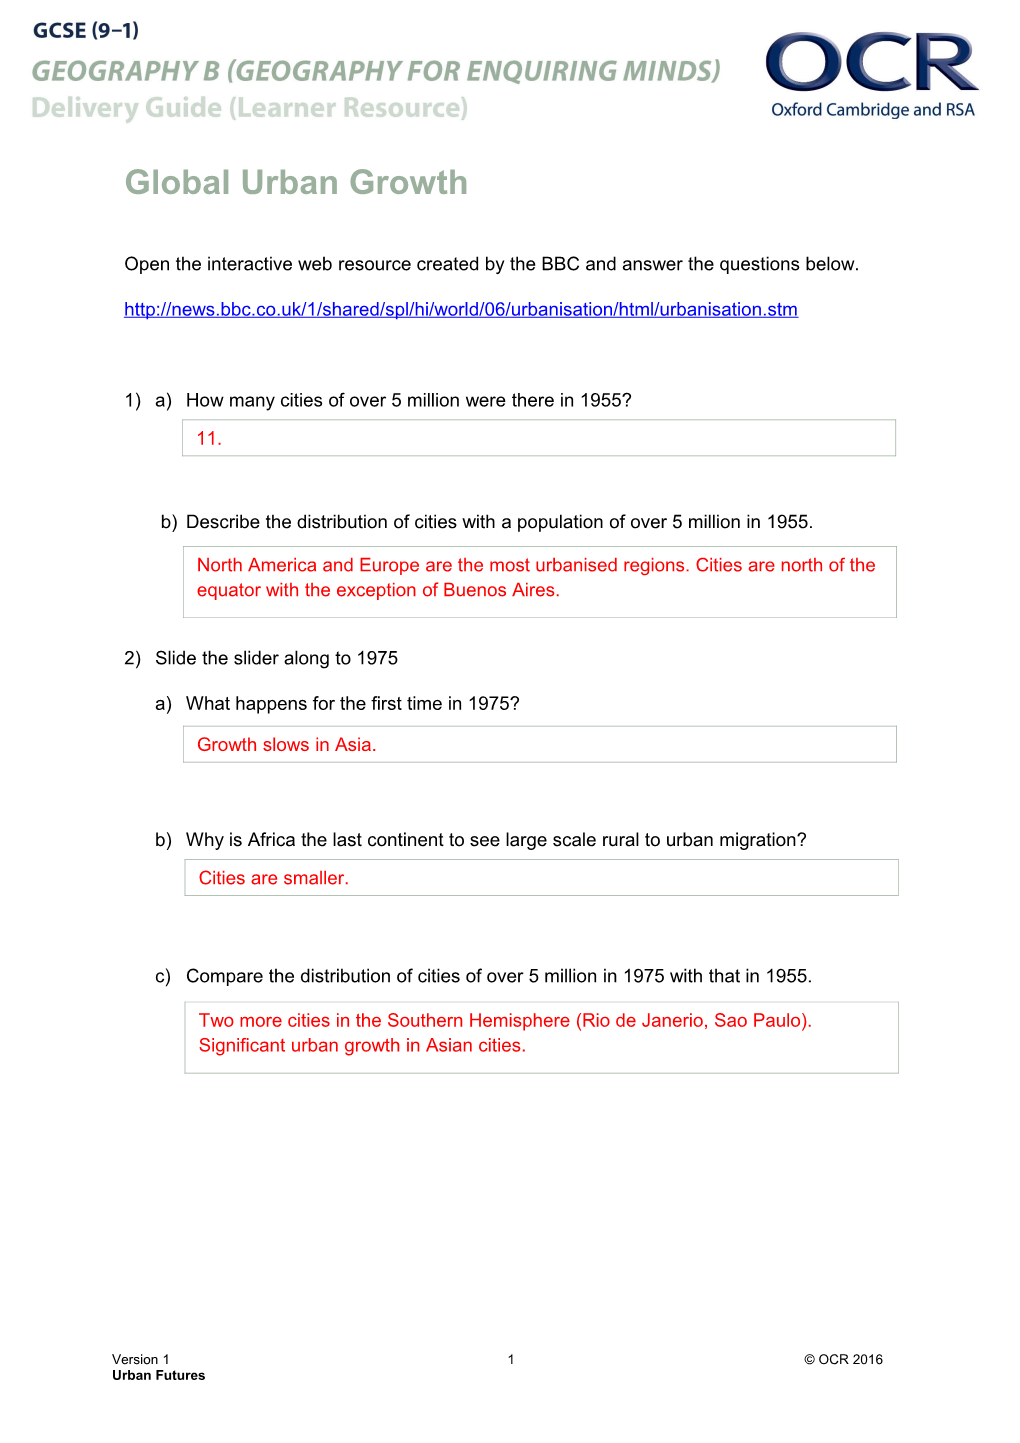 OCR GCSE (9-1) Geography B (Geography for Enquiring Minds) Urban Futures Activity 3 - Answers